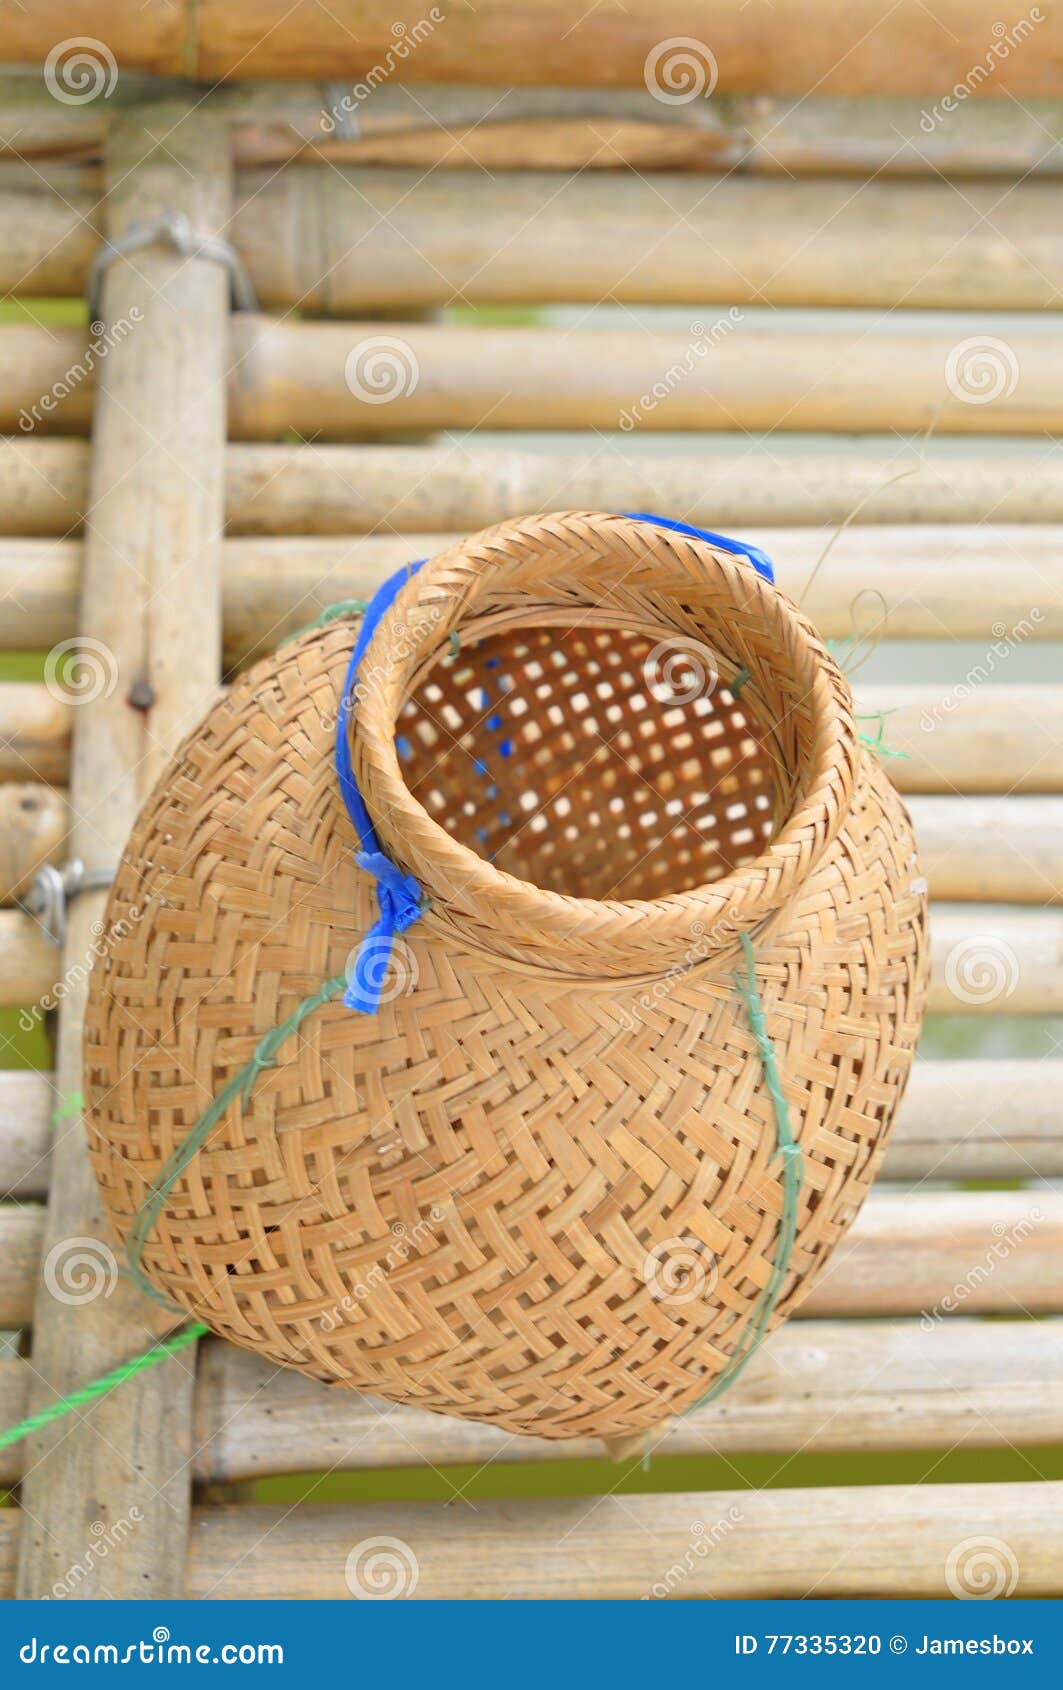 Fish trap basket stock photo. Image of accessory, commercial